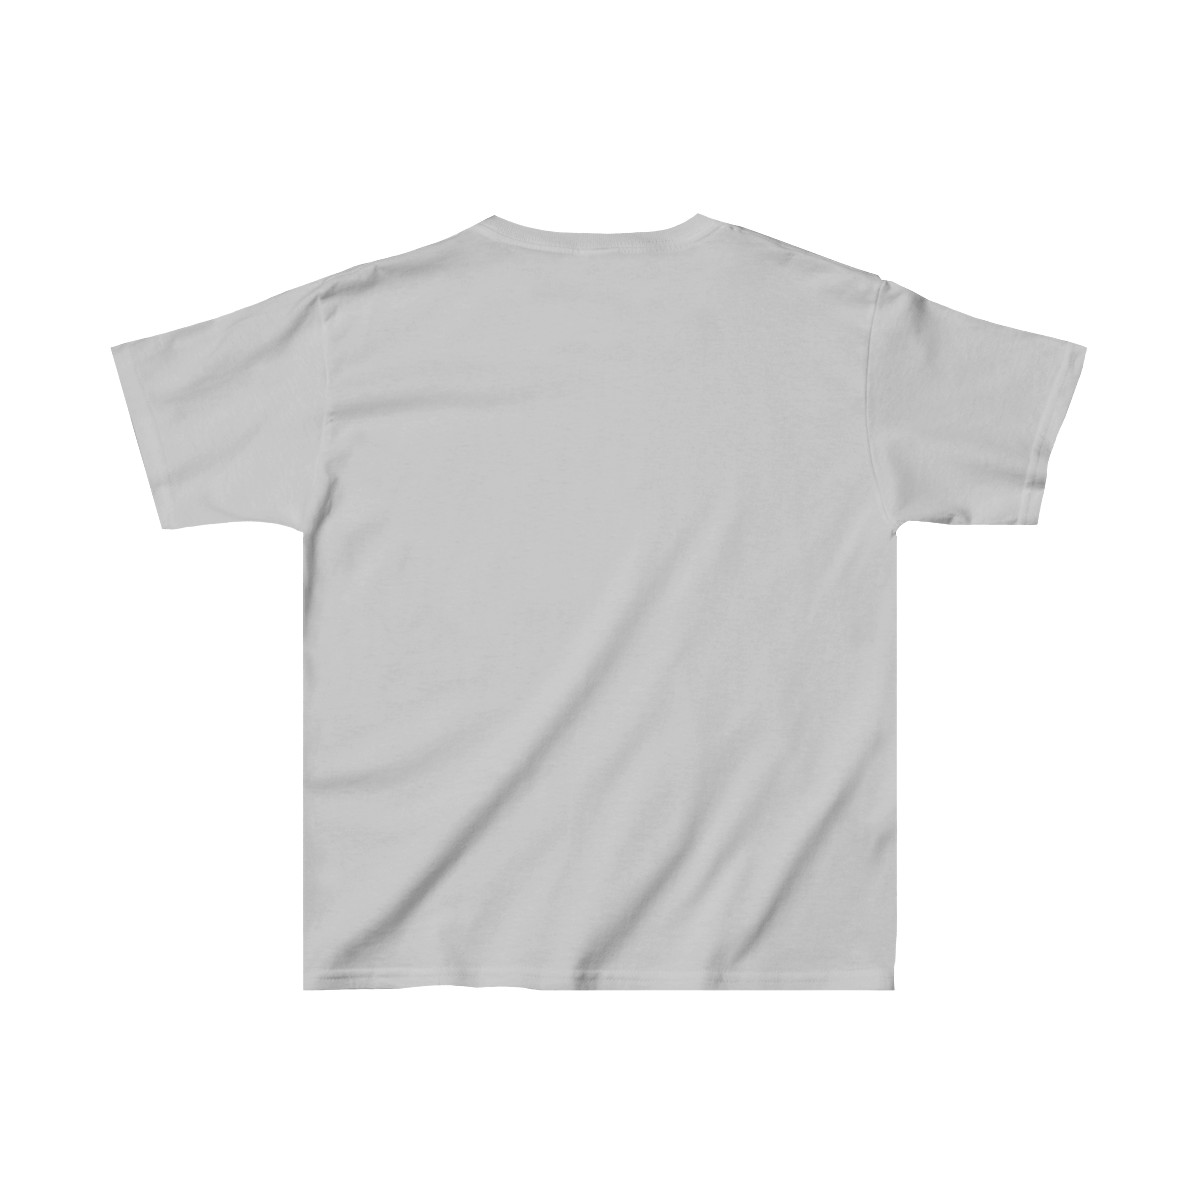 Child's JCAC Logo T-shirt - "Capturing the Colors of Creativity" product thumbnail image